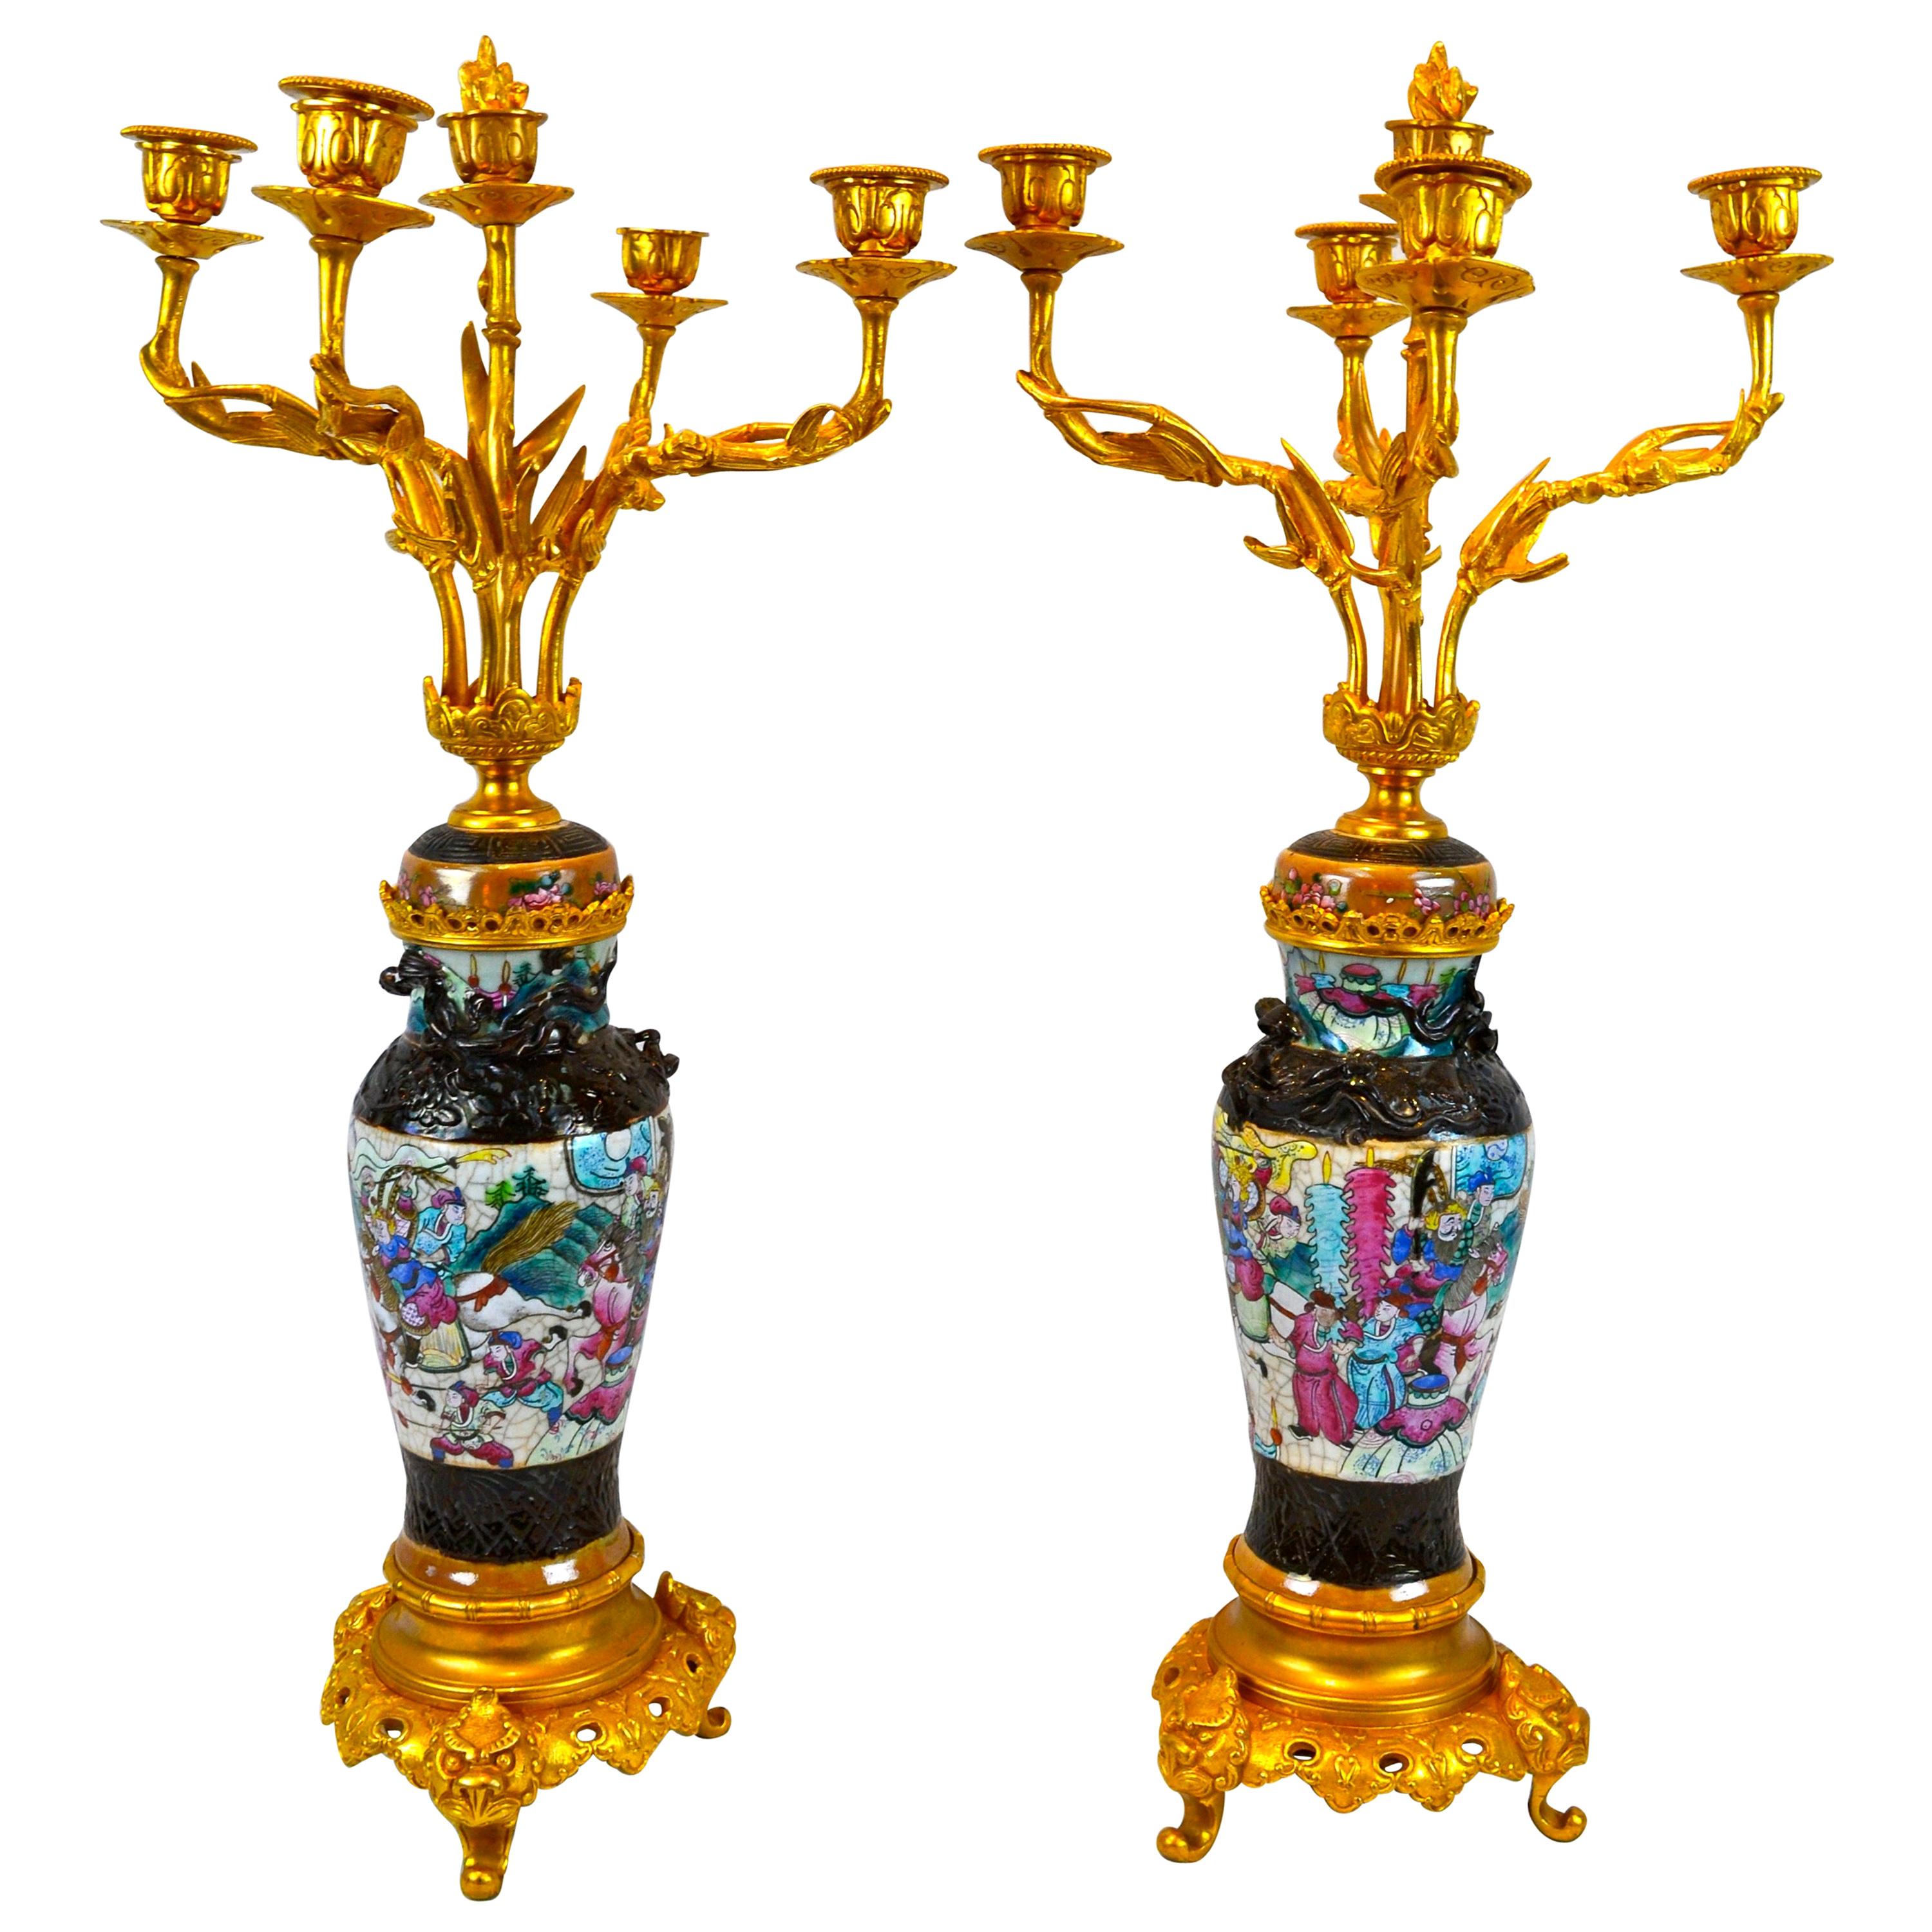 Pair of 19th Century Gilt Bronze and Chinese Nanking Porcelain Candelabra